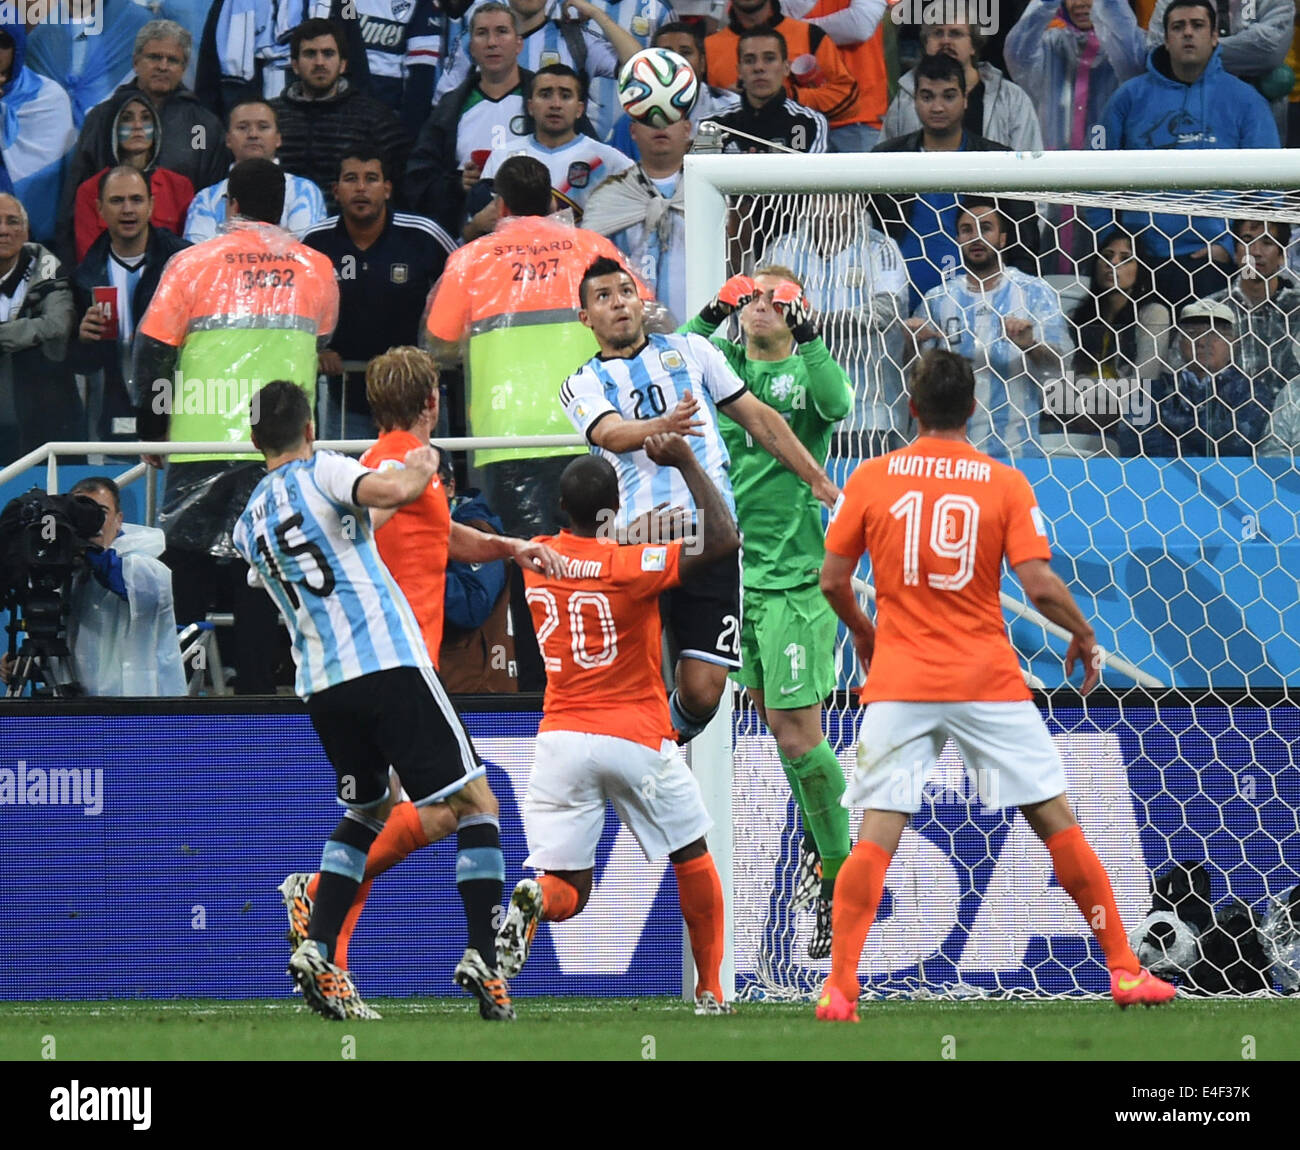 Sao Paulo, Brazil. 09th July, 2014. Sergio Aguero (top) of Argentina and goalkeeper Jasper Cillessen (2-R) of the Netherlands vie for the ball during the FIFA World Cup 2014 semi-final soccer match between the Netherlands and Argentina at the Arena Corinthians in Sao Paulo, Brazil, 09 July 2014. Photo: Marius Becker/dpa/Alamy Live News Stock Photo